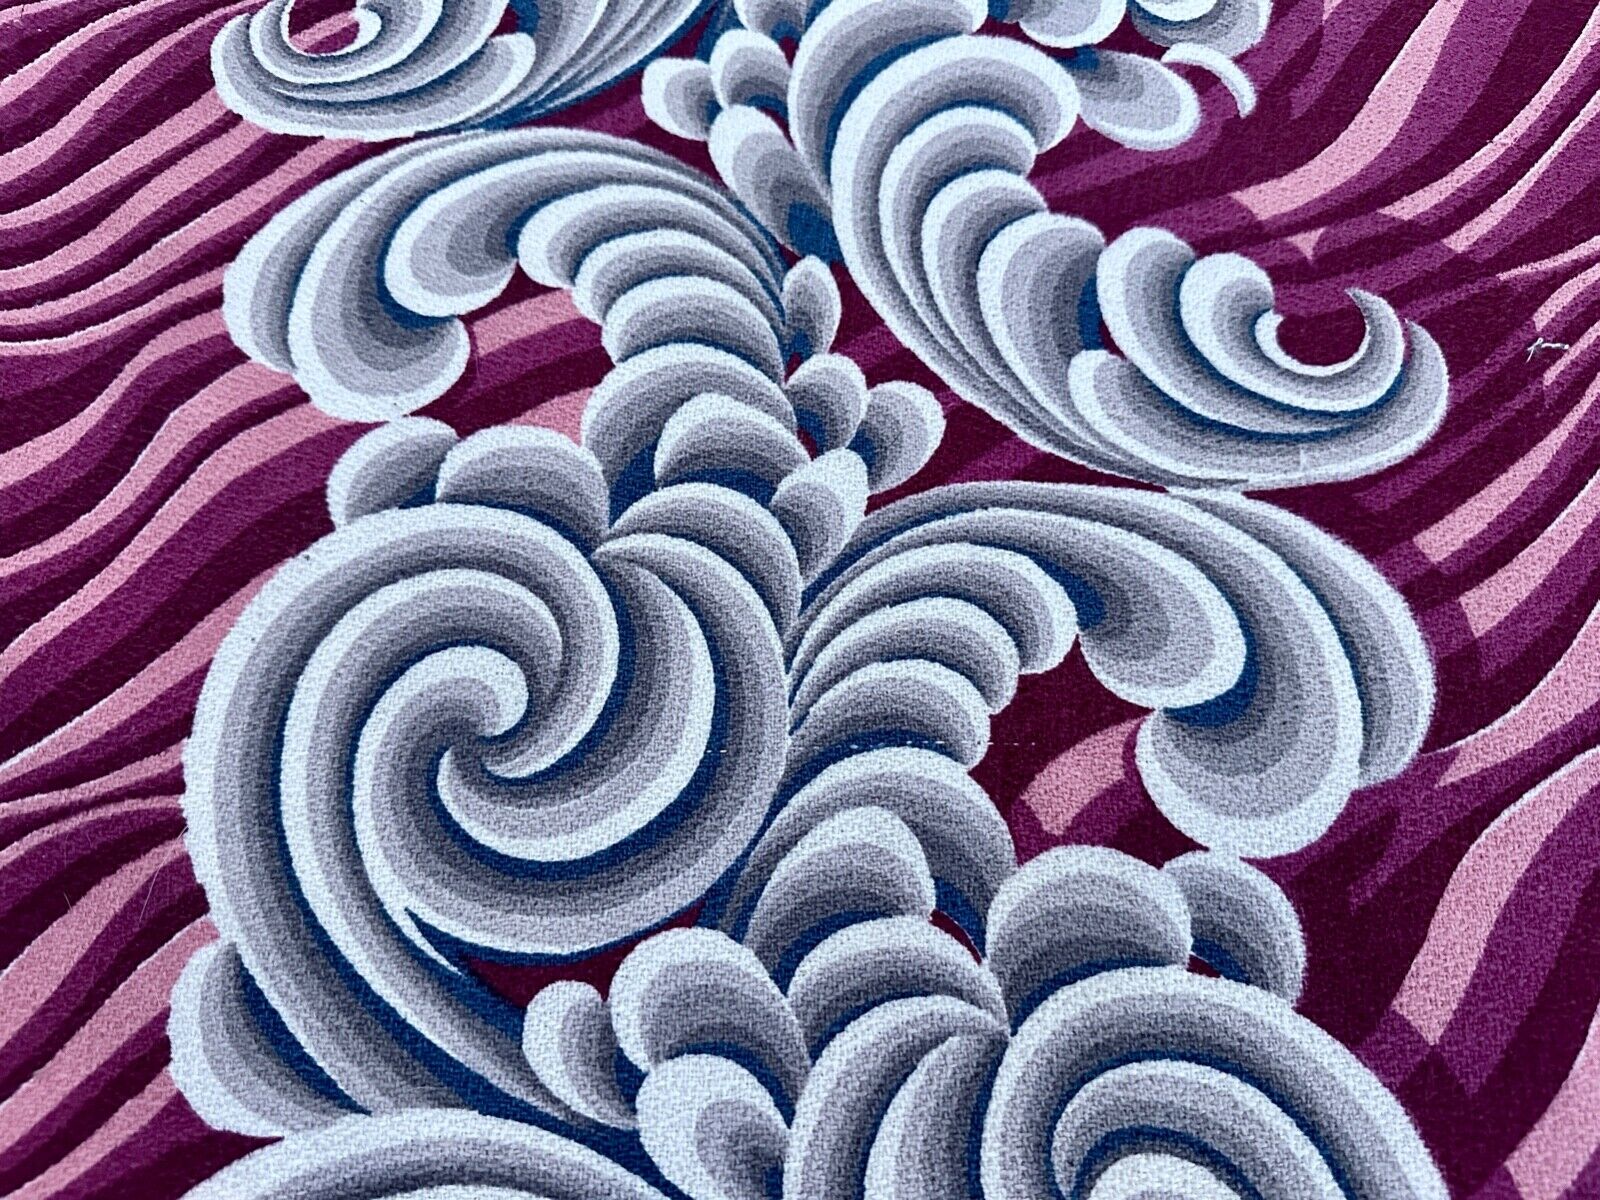 1930's Art Deco Rolling CLOUDS on Orchid Purples ZEBRA Barkcloth Vintage Fabric